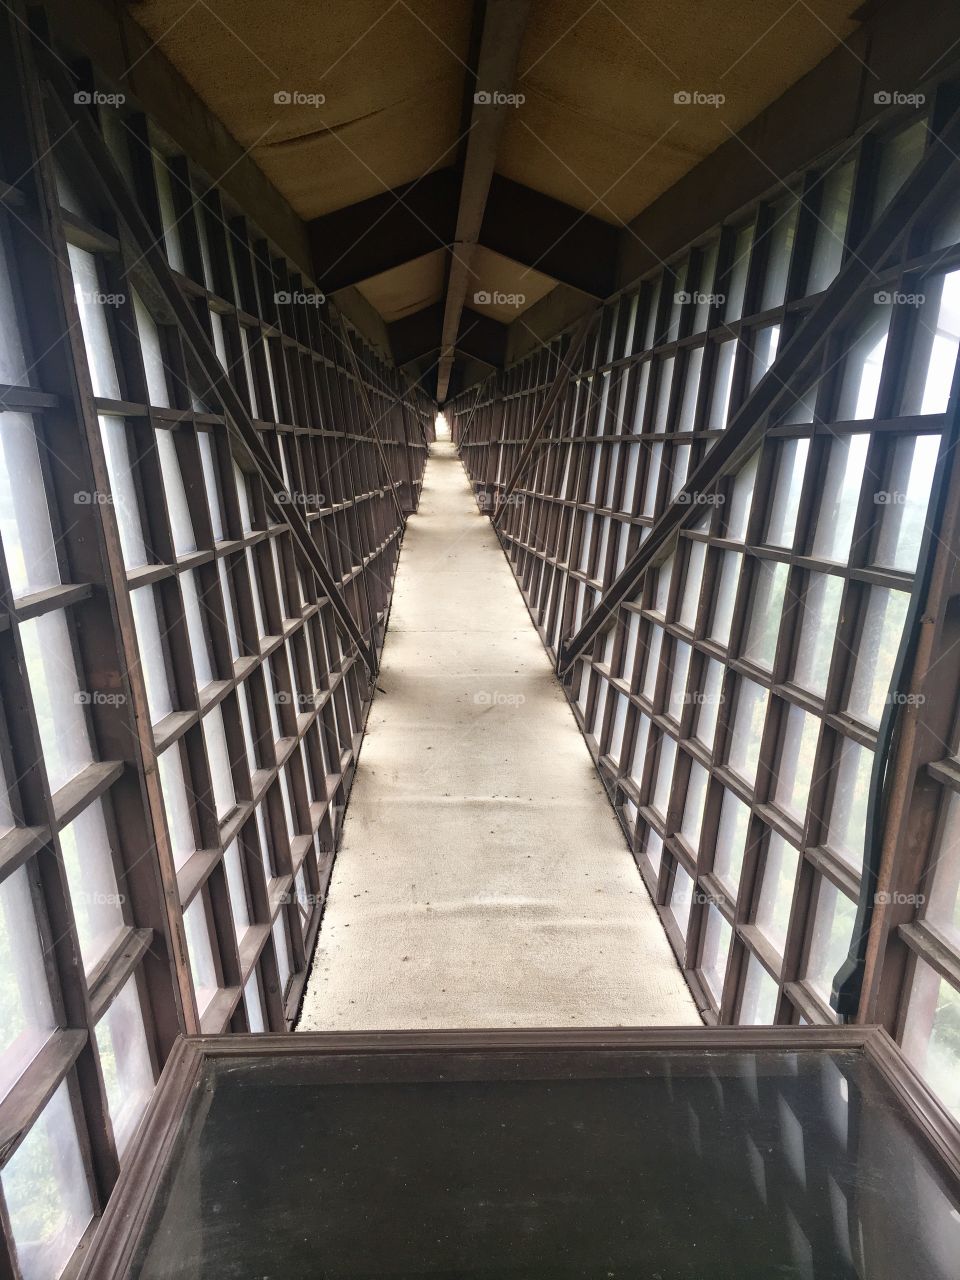 Infinity room at House on the Rock, WI